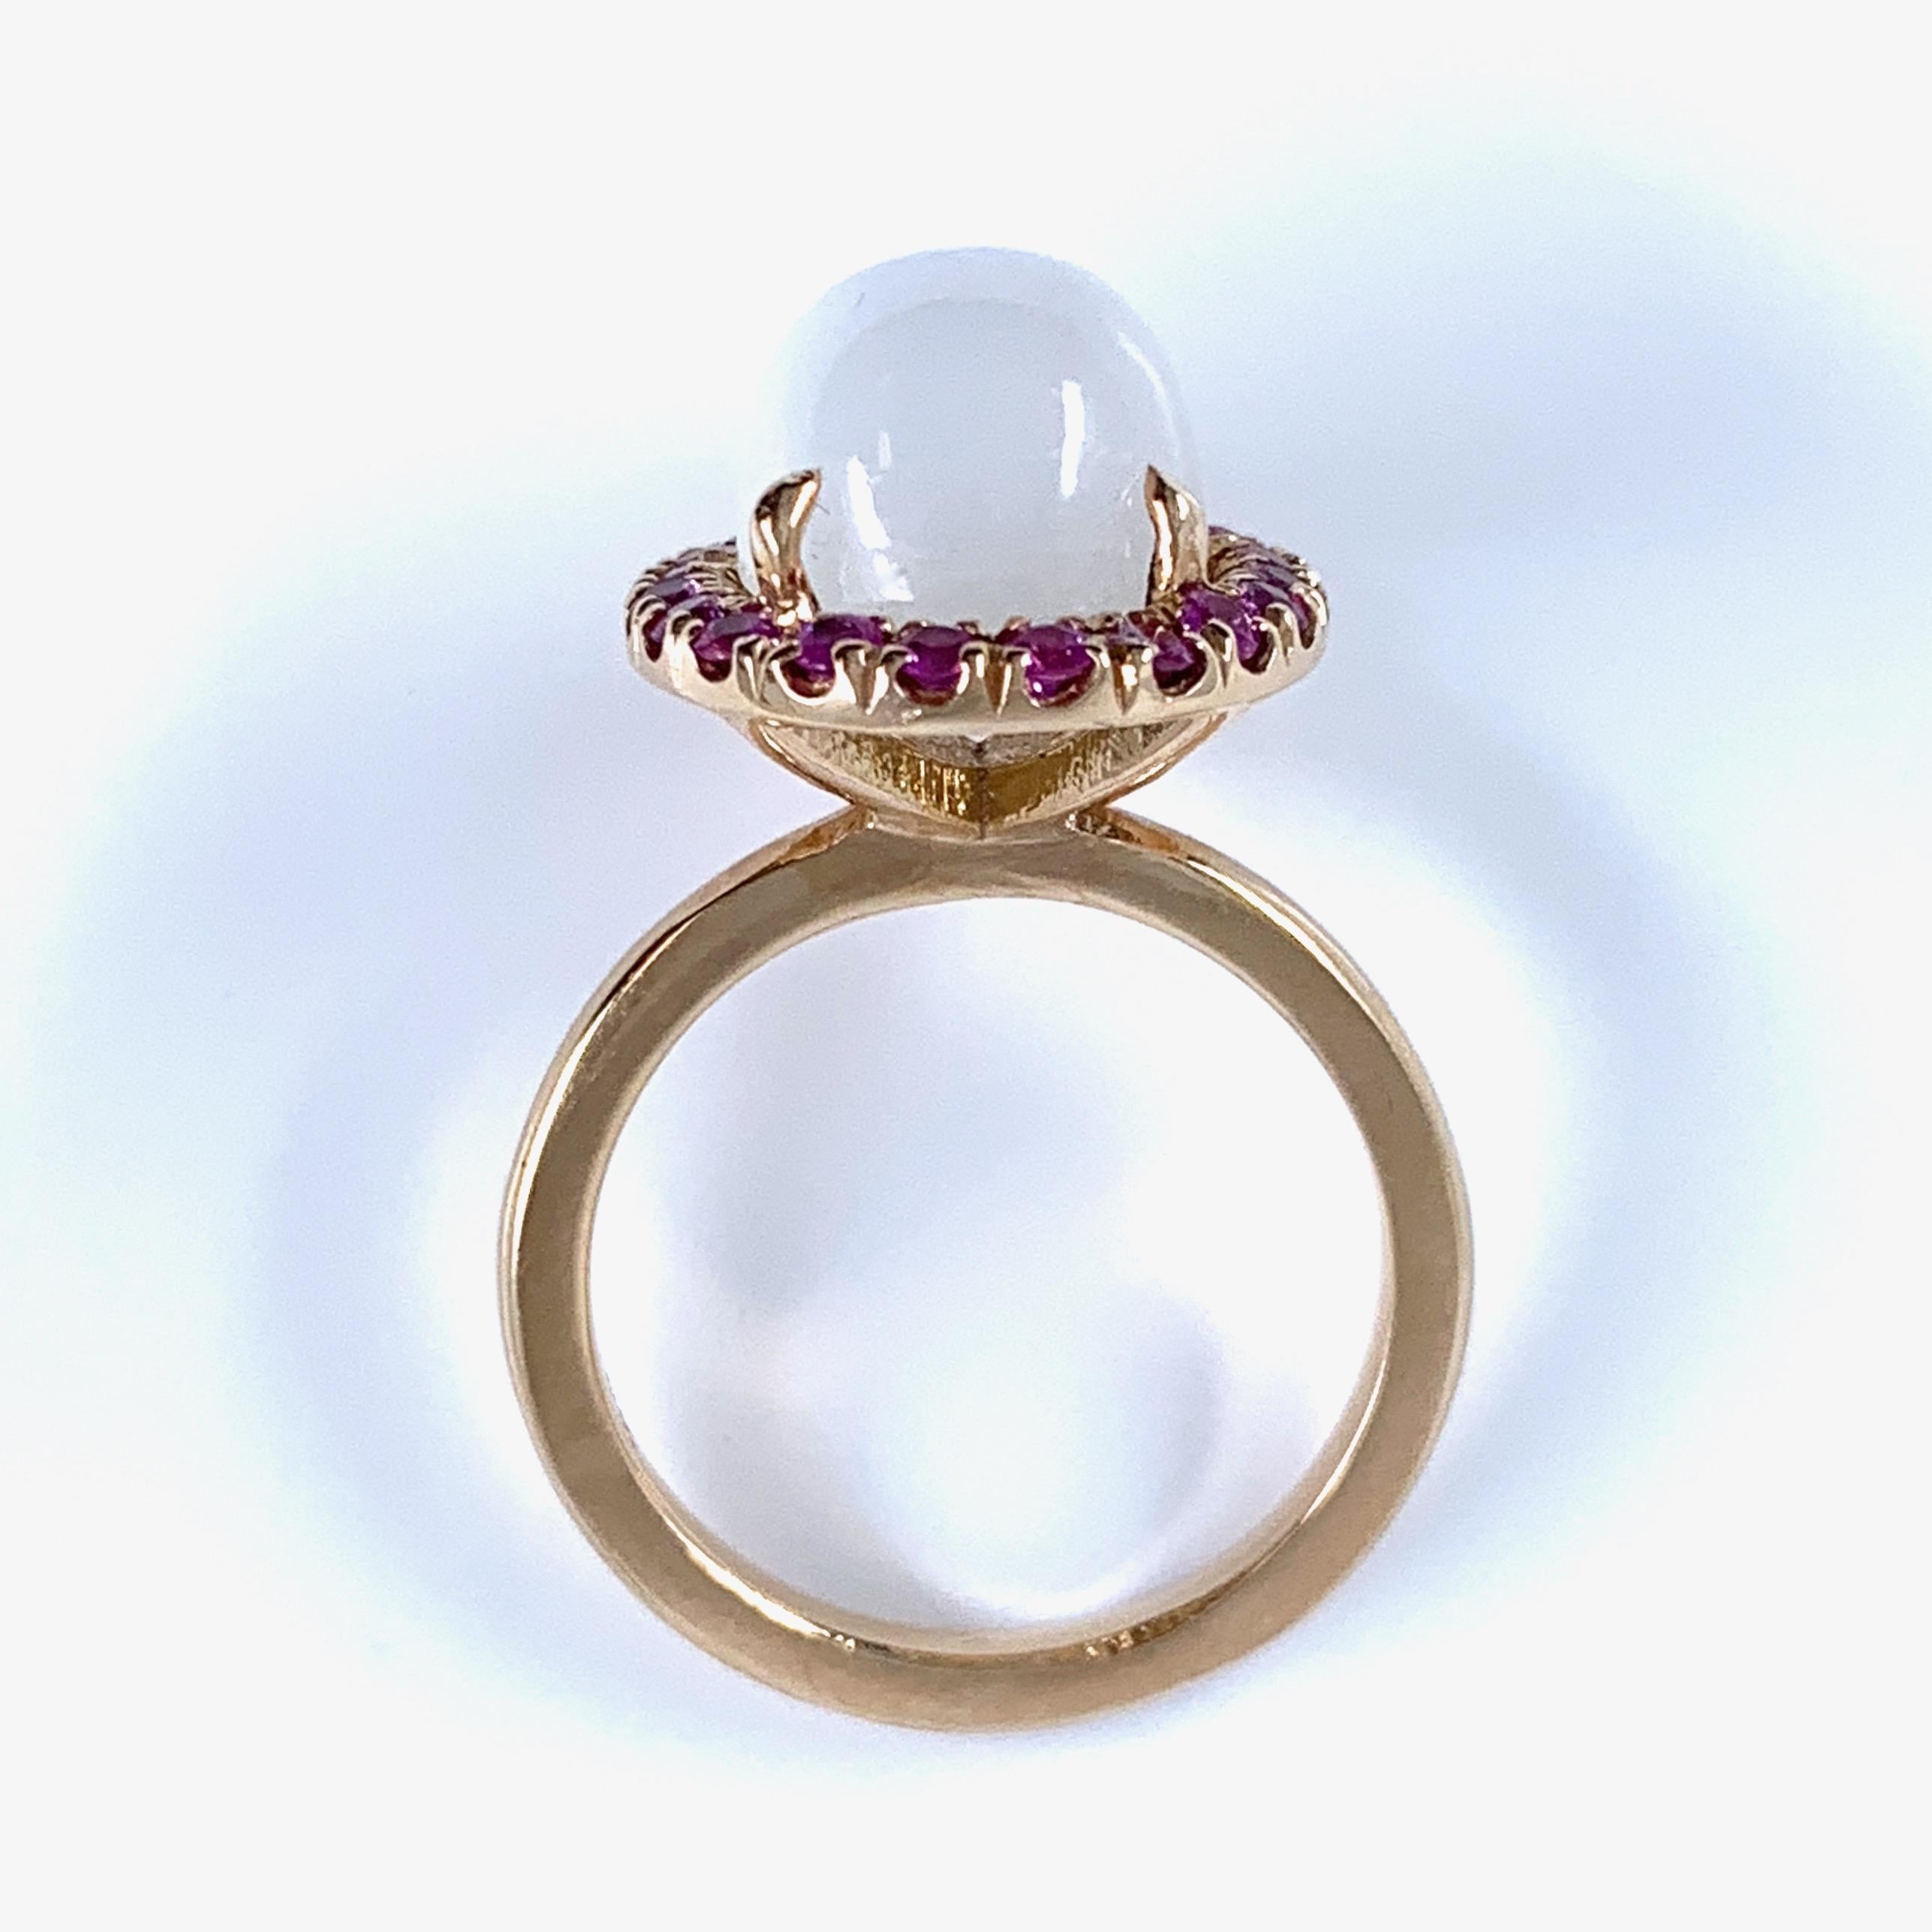 Cats Eye Moonstone Halo Ring with Burmese Rubies in Rose Gold 2